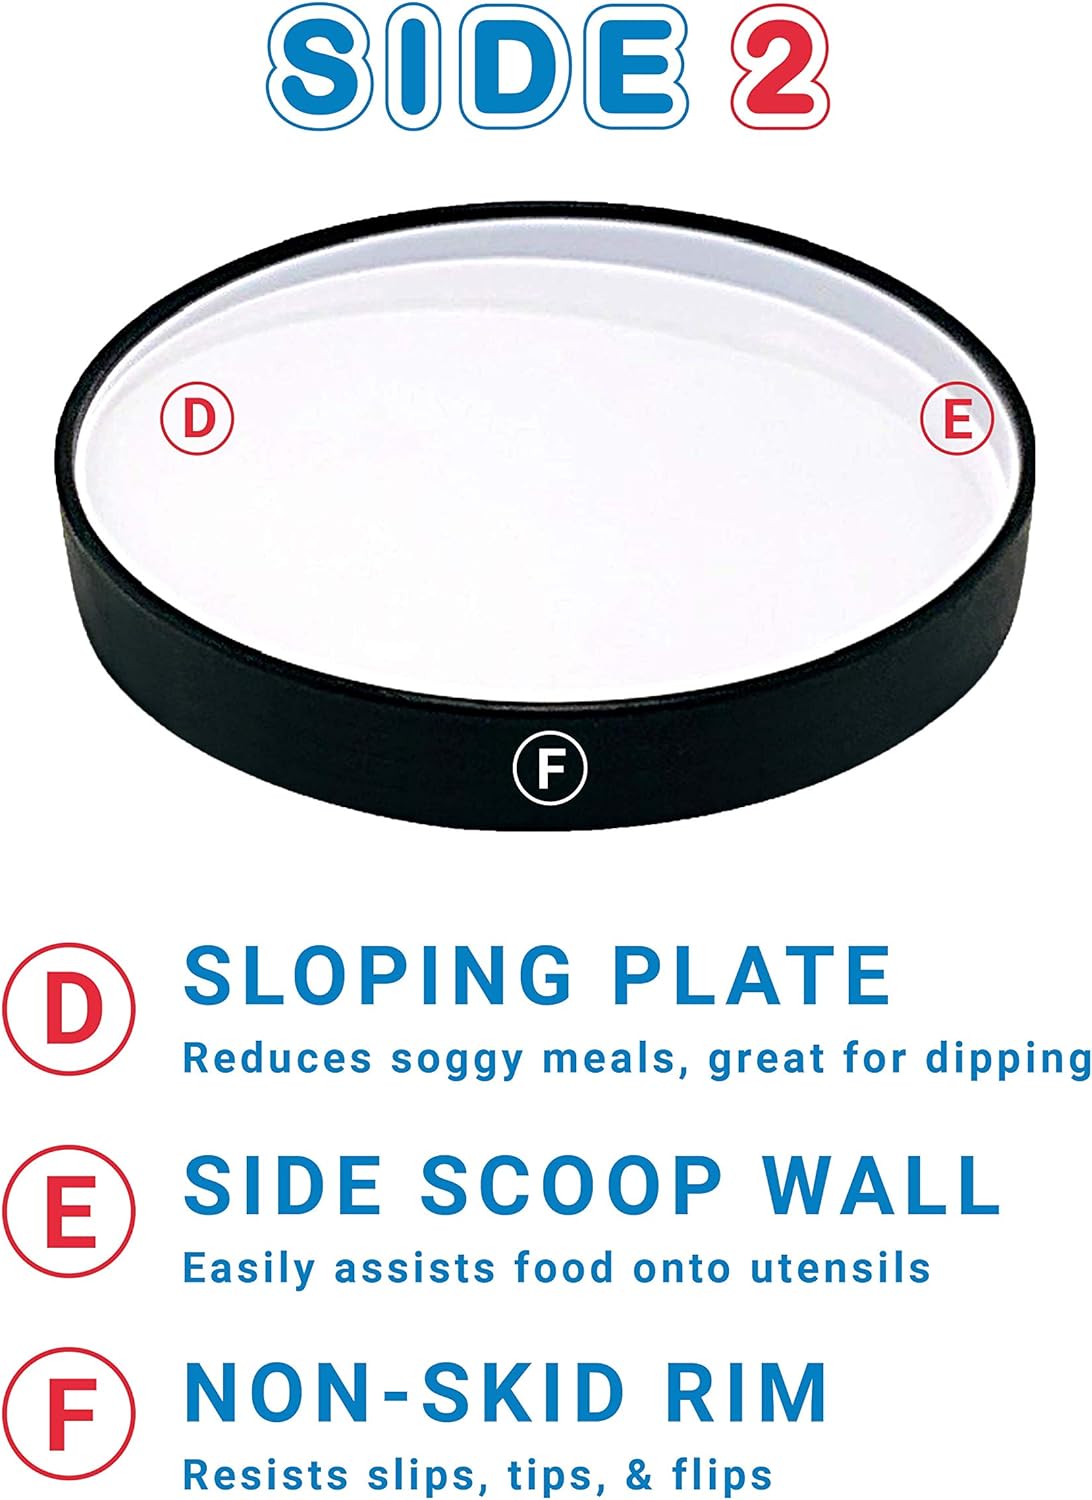 sloping plate reduces soggy meals, side scoop wall for one handed scooping onton utensils, non slip rim: Non slip, suction, scoop plate for easier eating that's BPA free for adults